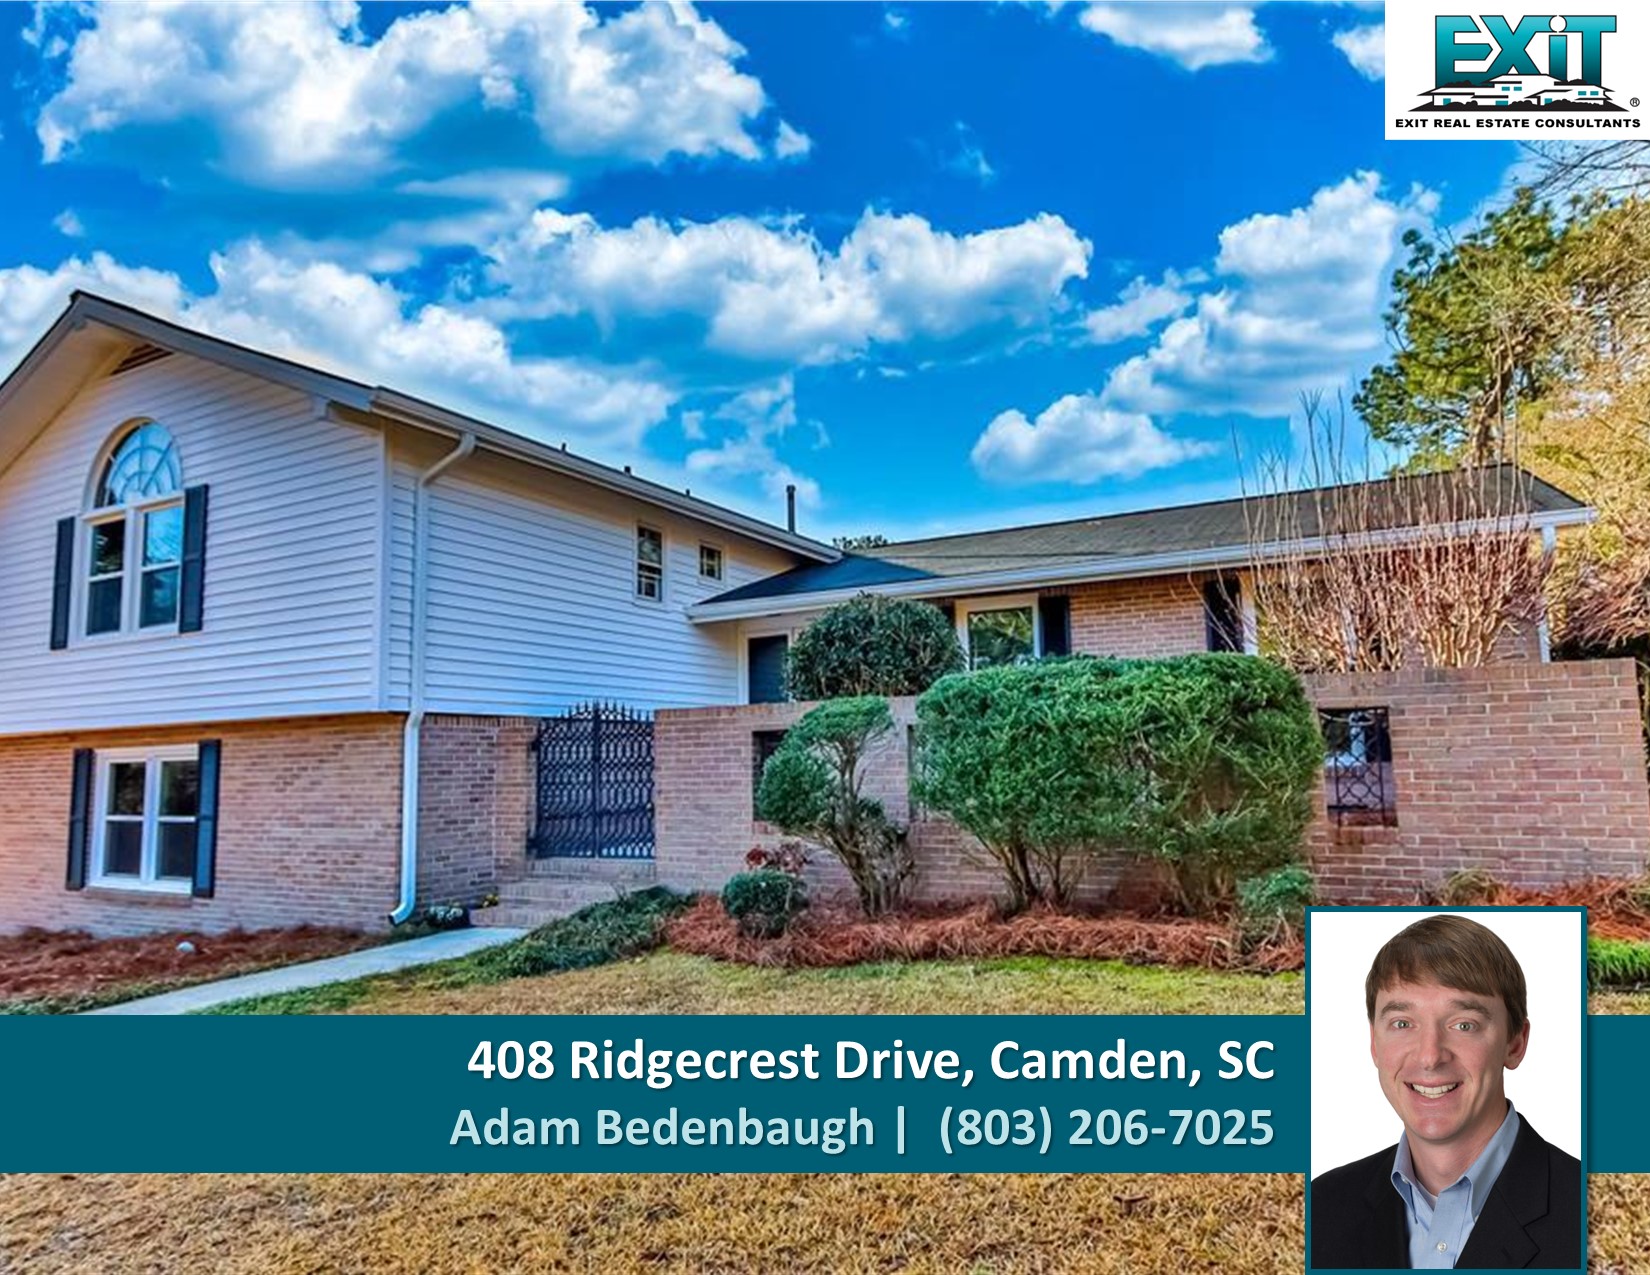 Just listed in Cool Springs - Camden